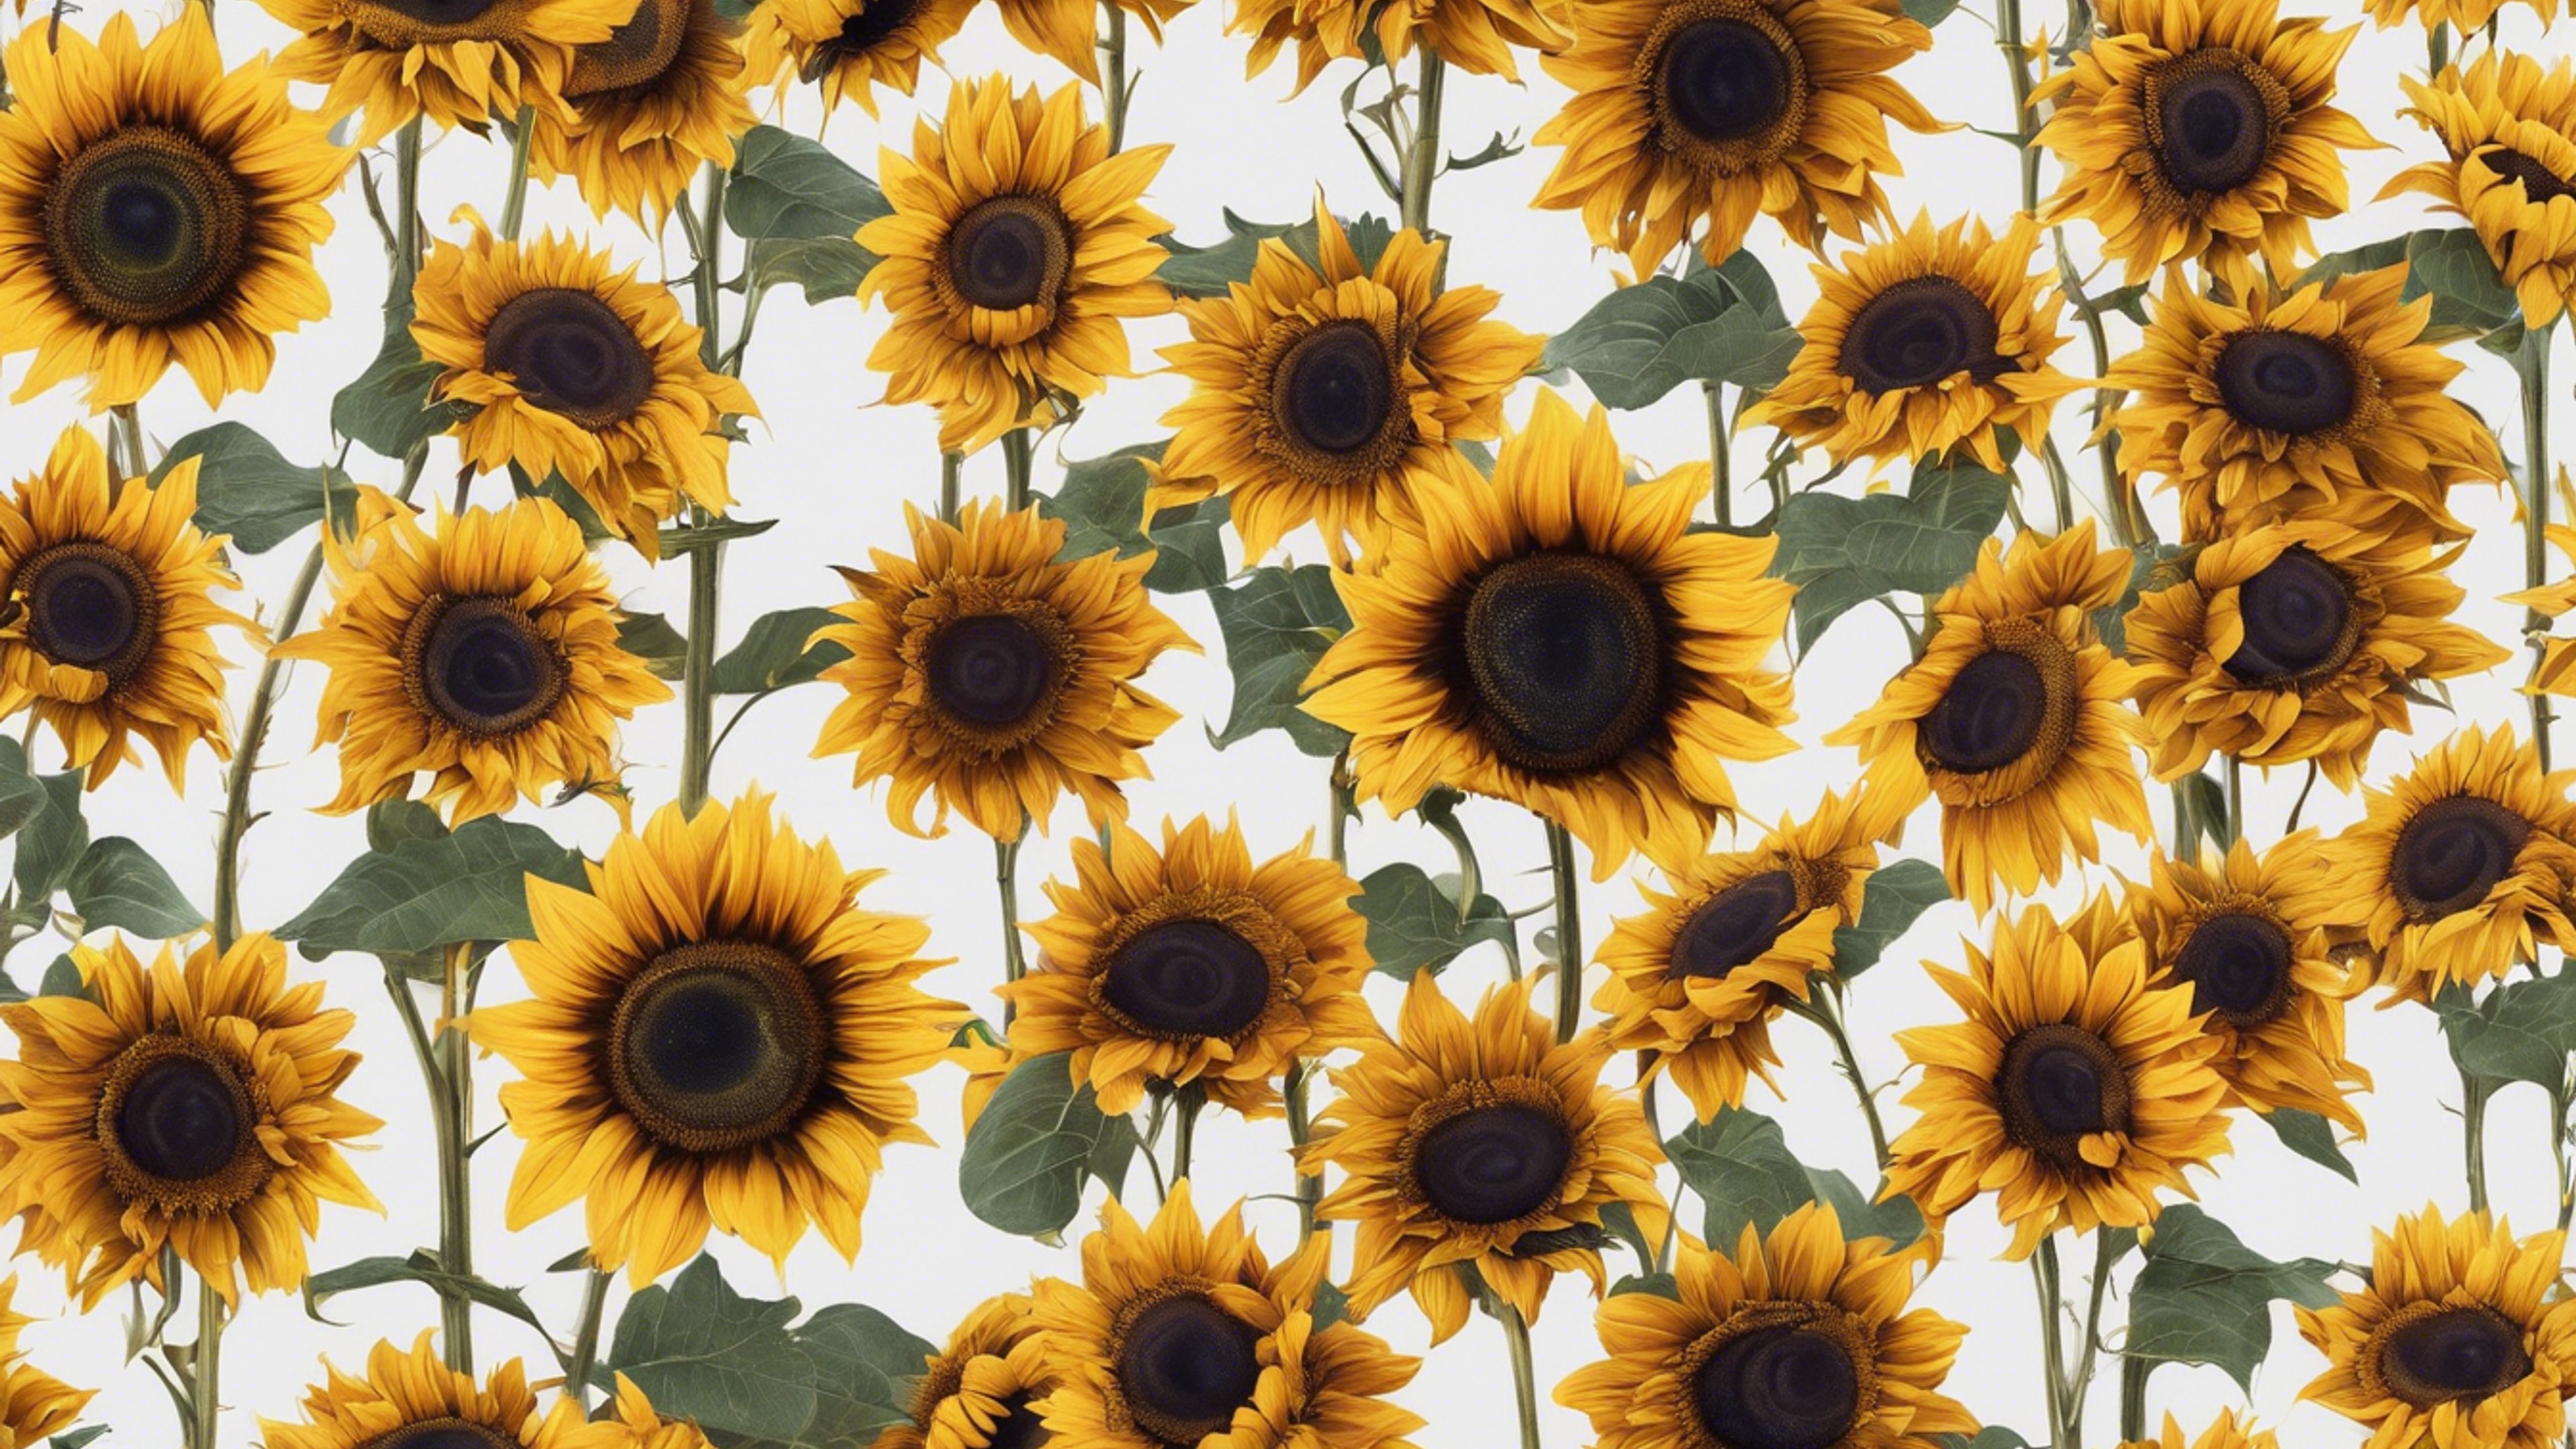 White fabric adorned with a seamless array of dark, debonair sunflowers. Wallpaper[27ef1d3ab63c4766bab4]